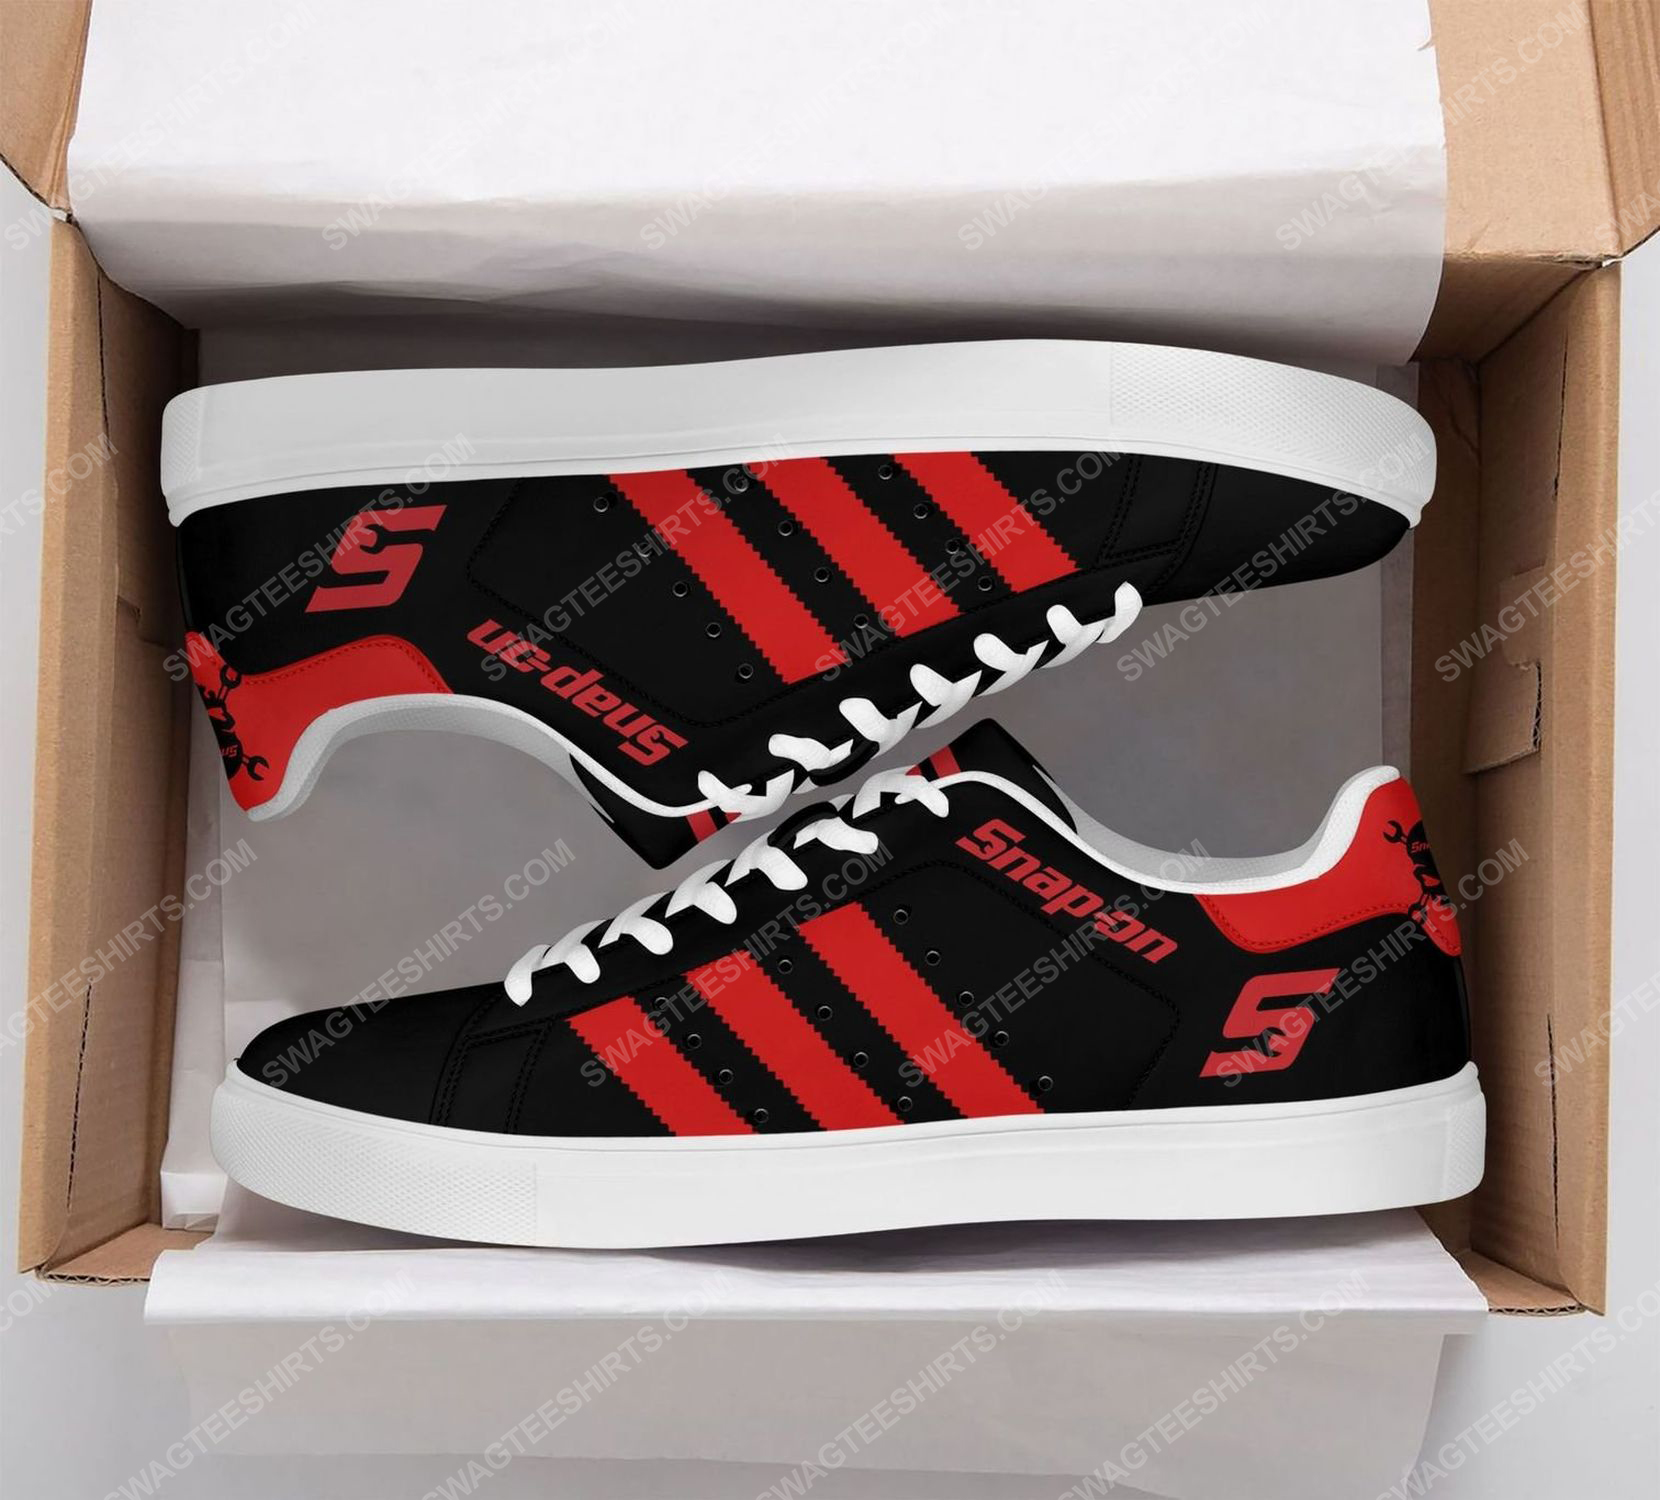 The snap-on version black stan smith shoes 2